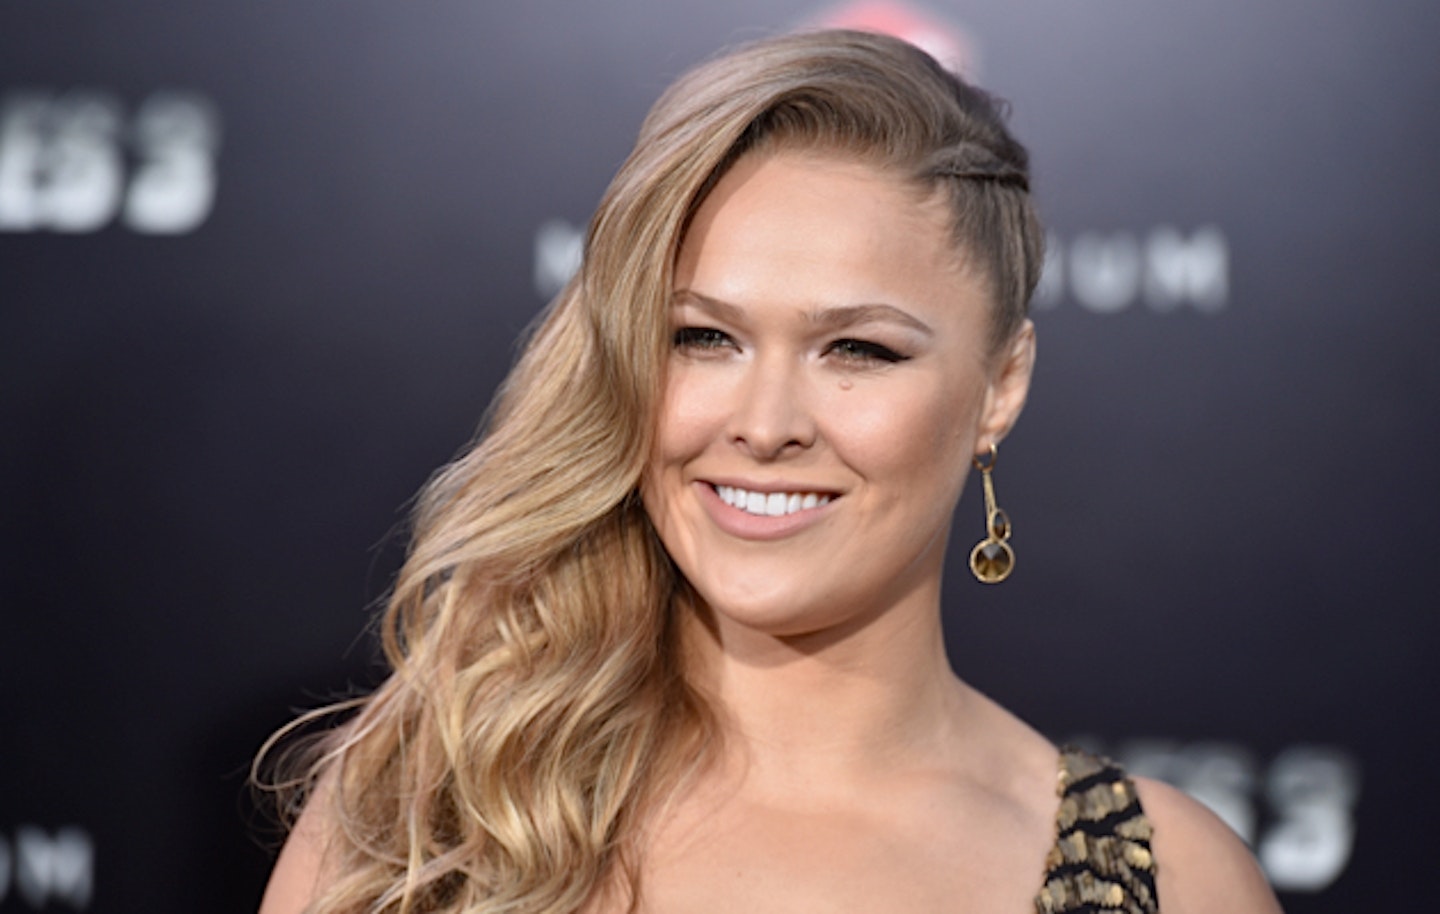 Ronda-Rousey-starring-her-own-story